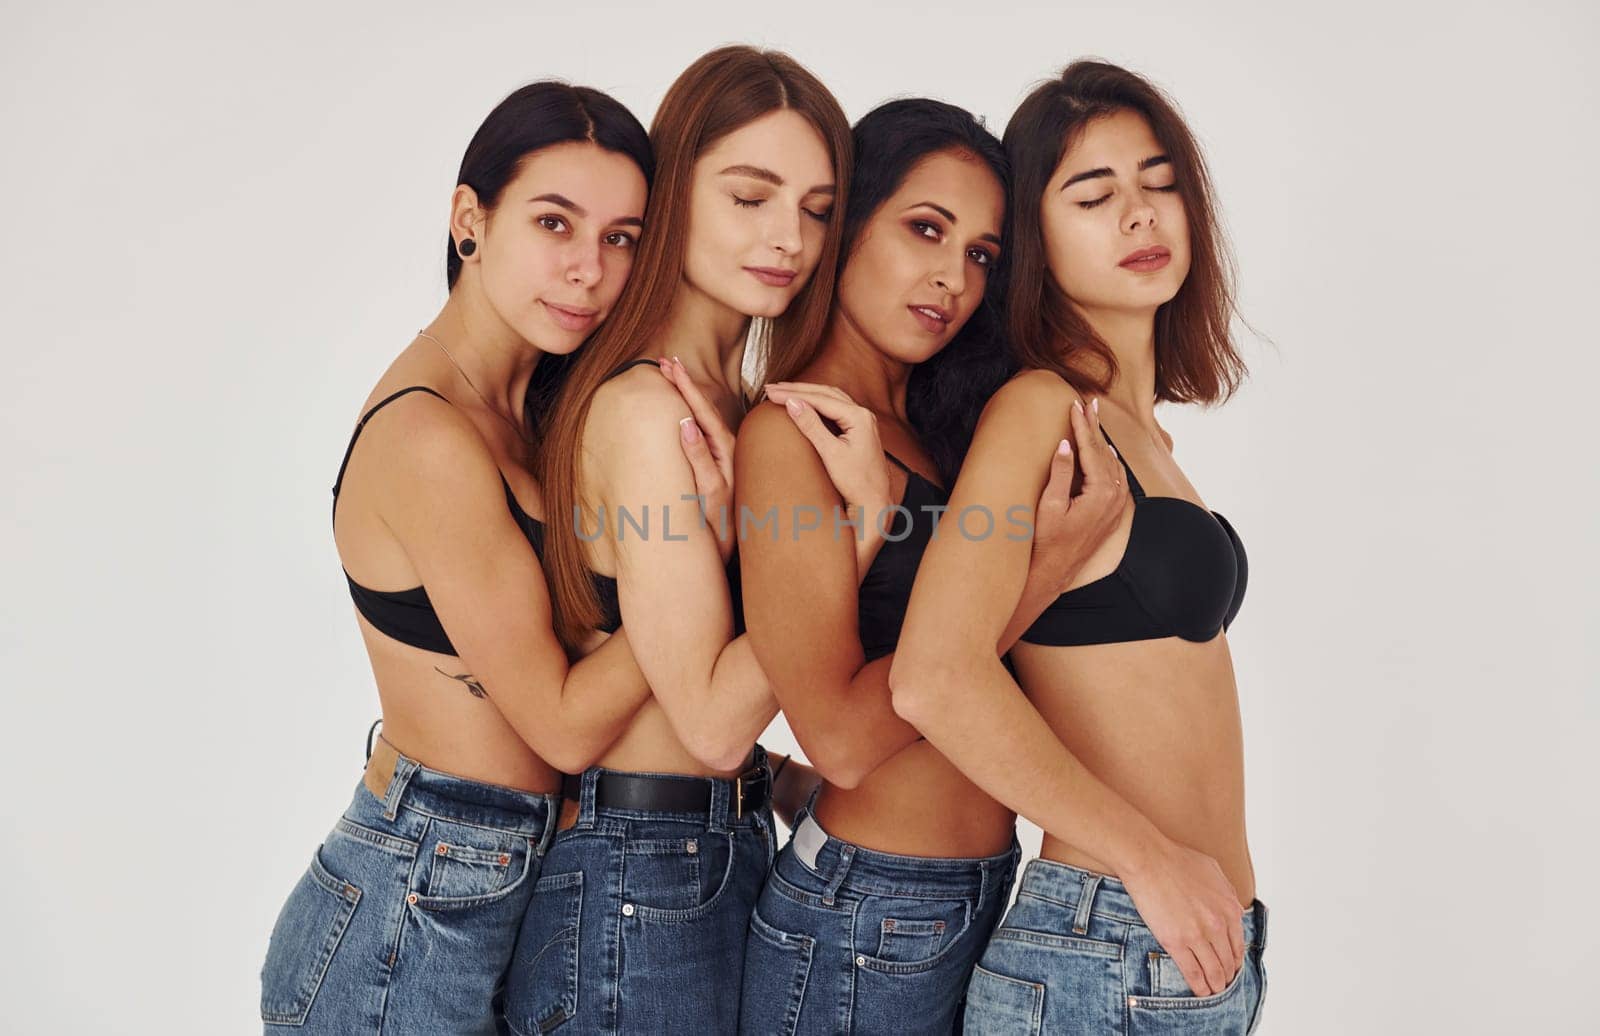 Leaning on each other. Four young women in lingerie together indoors. White background by Standret